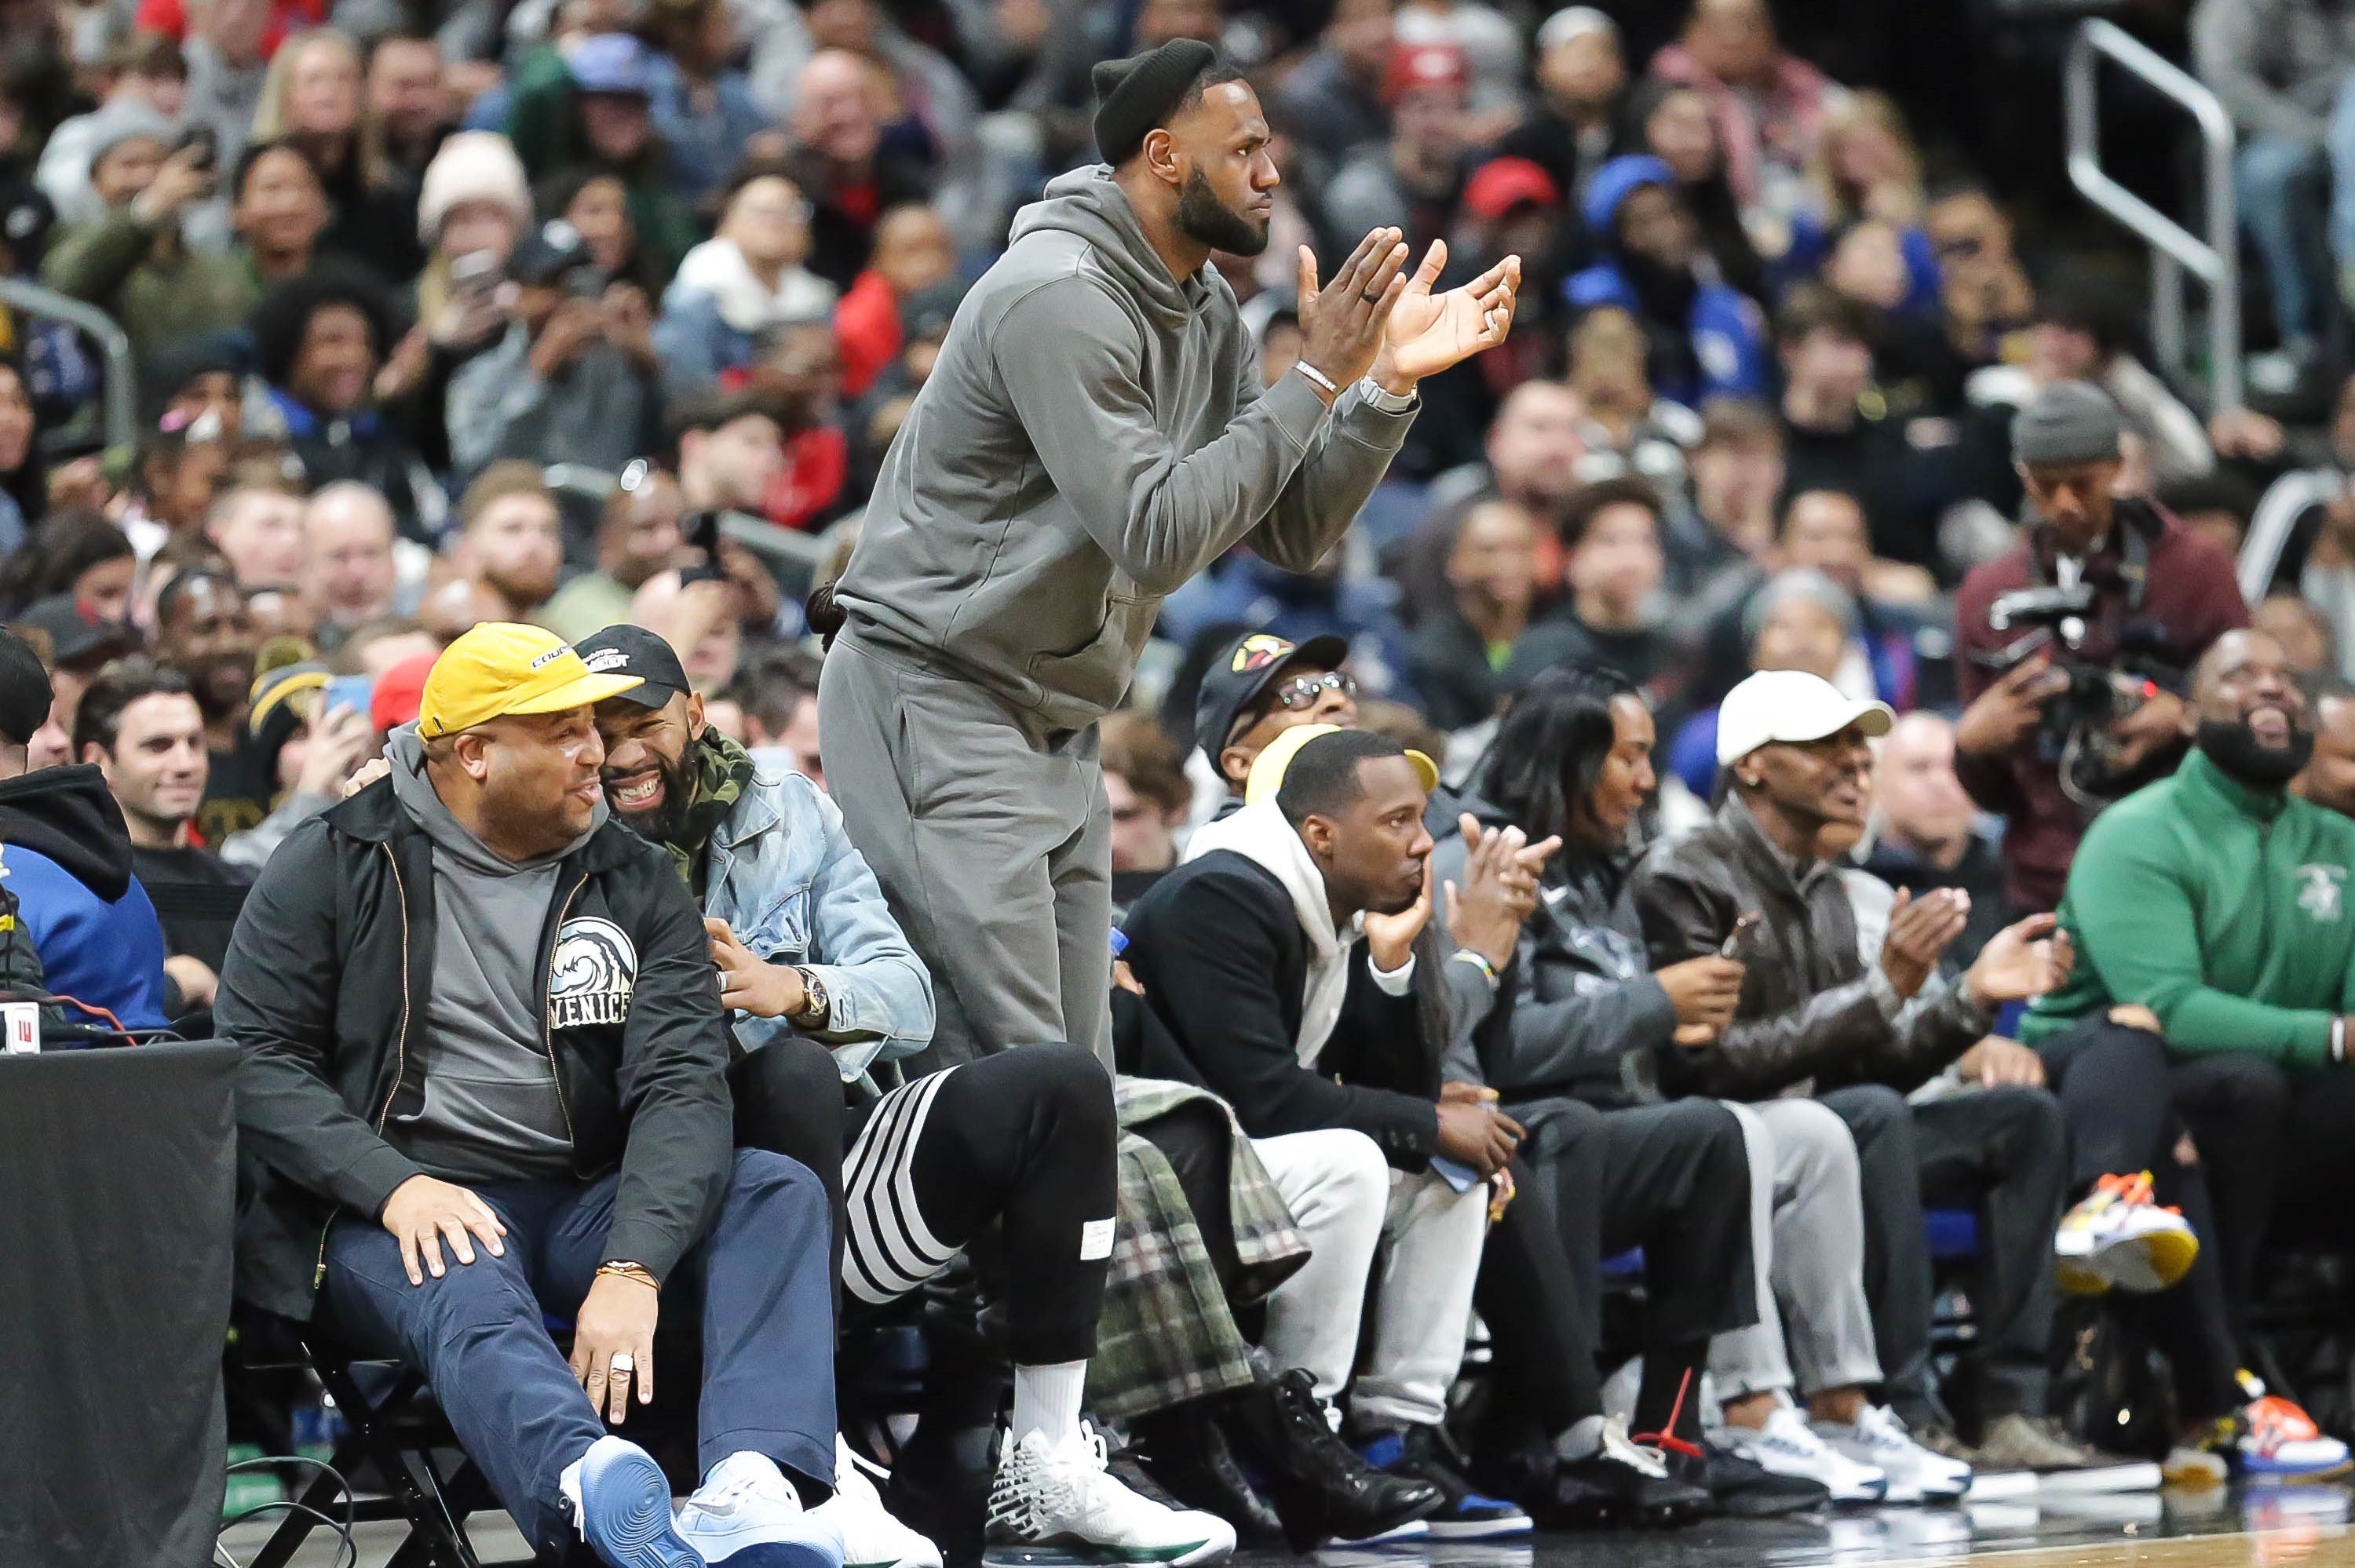 LeBron James, our retroactive 2003 Male High School Athlete of the Year, cheers on his son at a game in December.